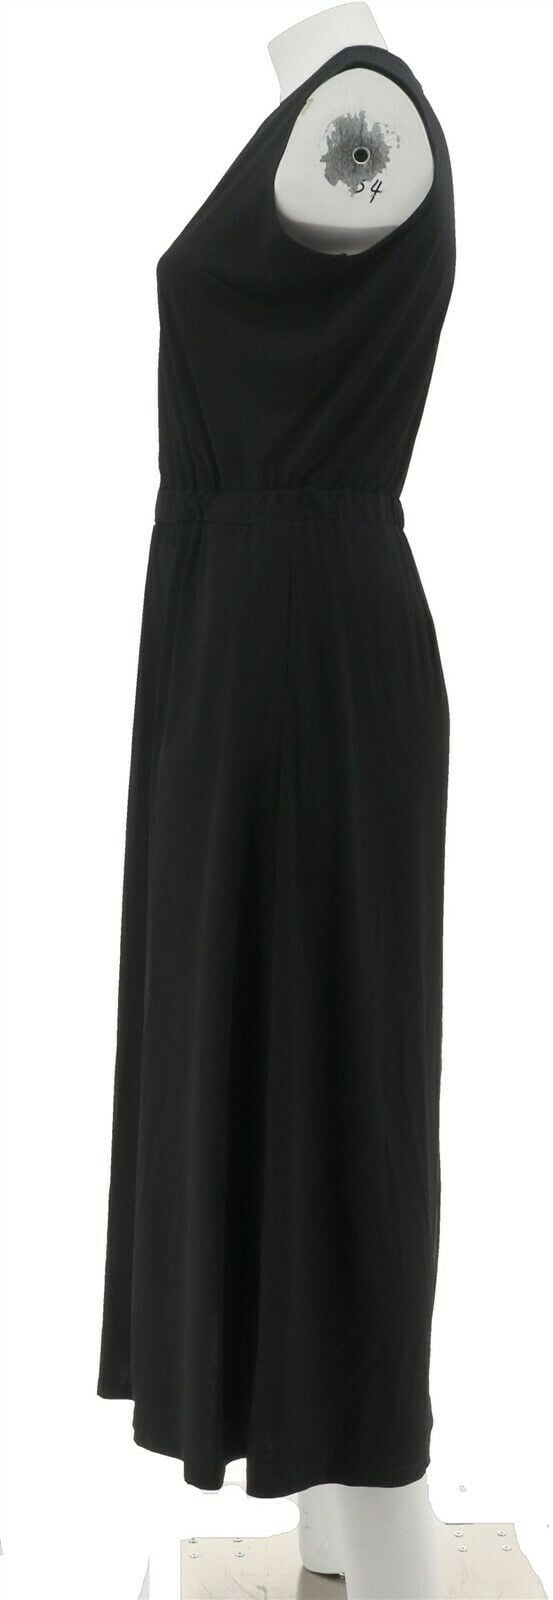 petite maxi dresses with pockets